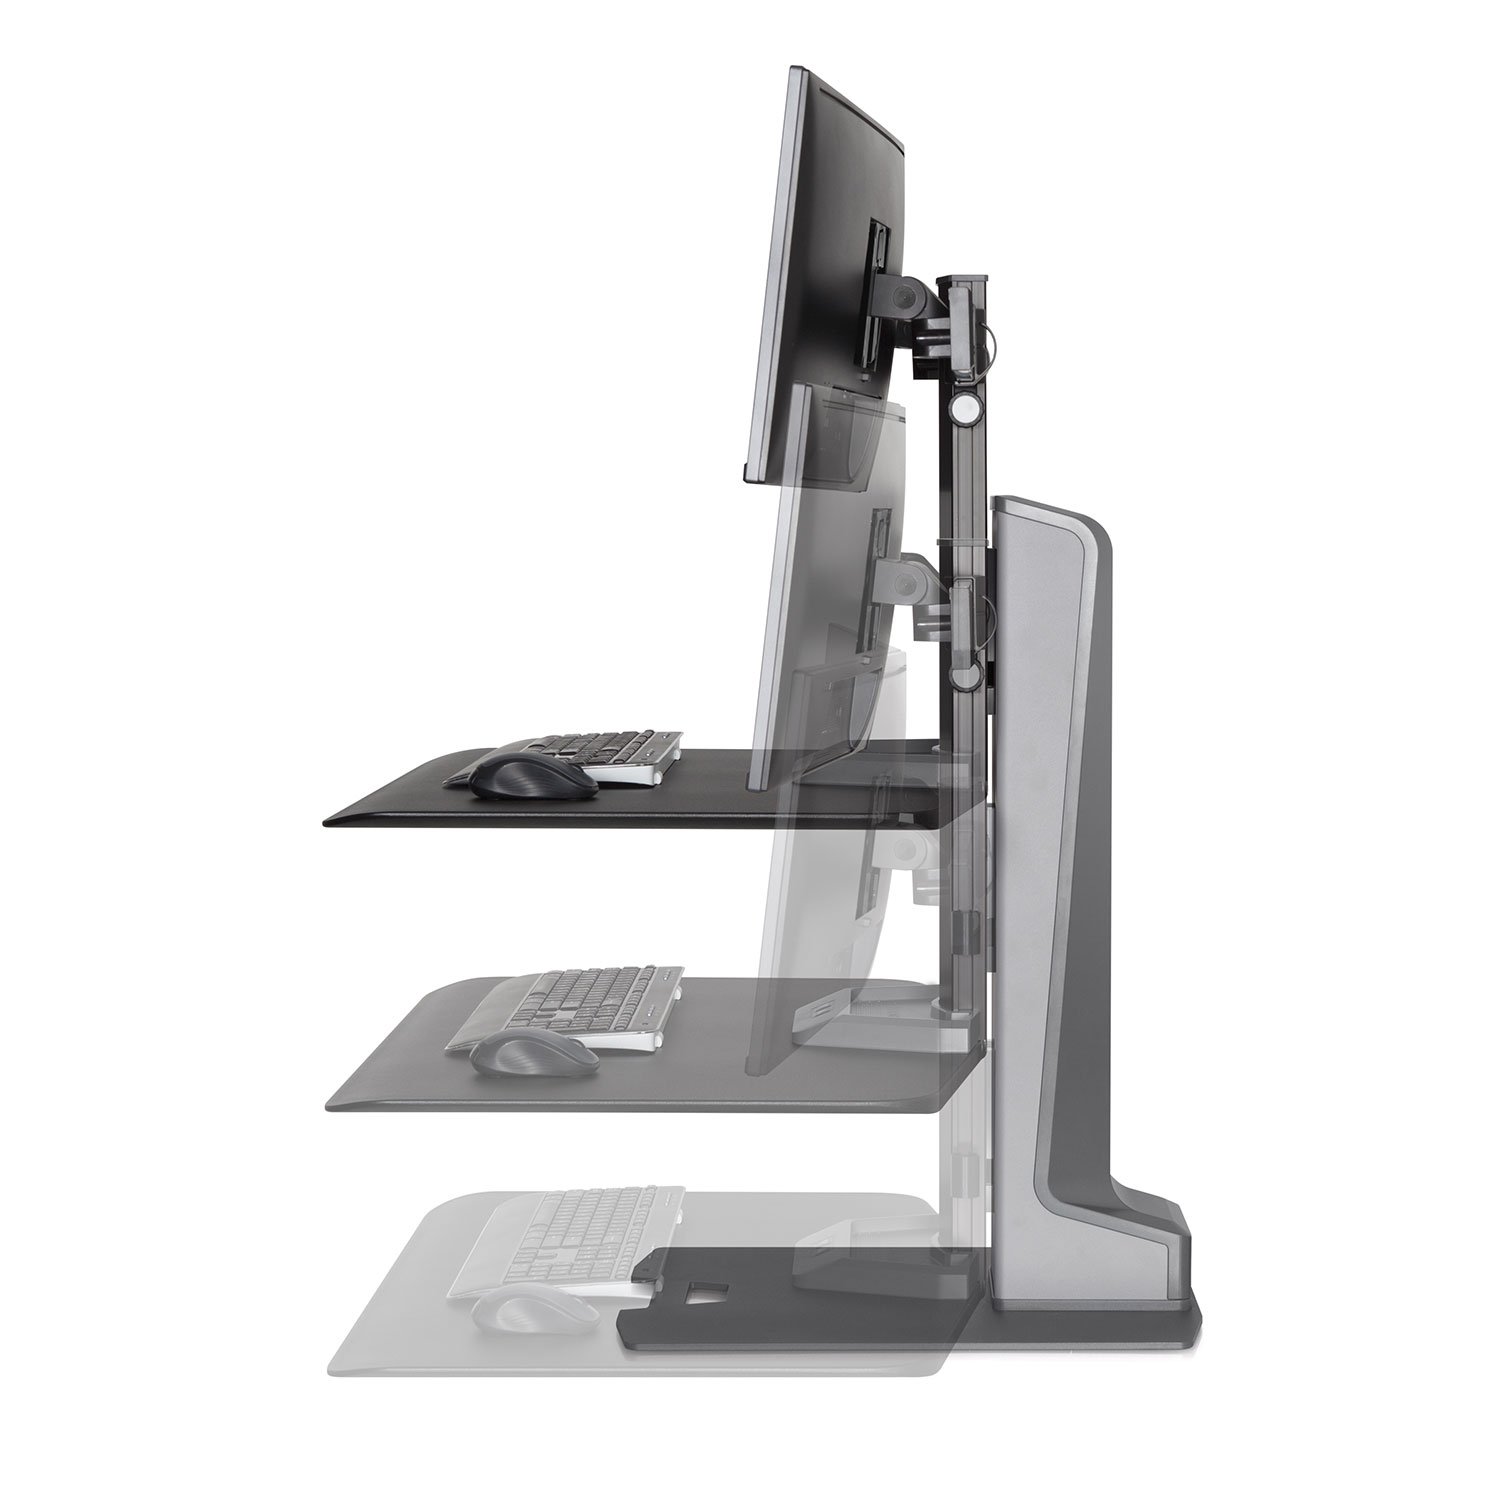 Electric height adjustment makes going from sitting to standing effortless